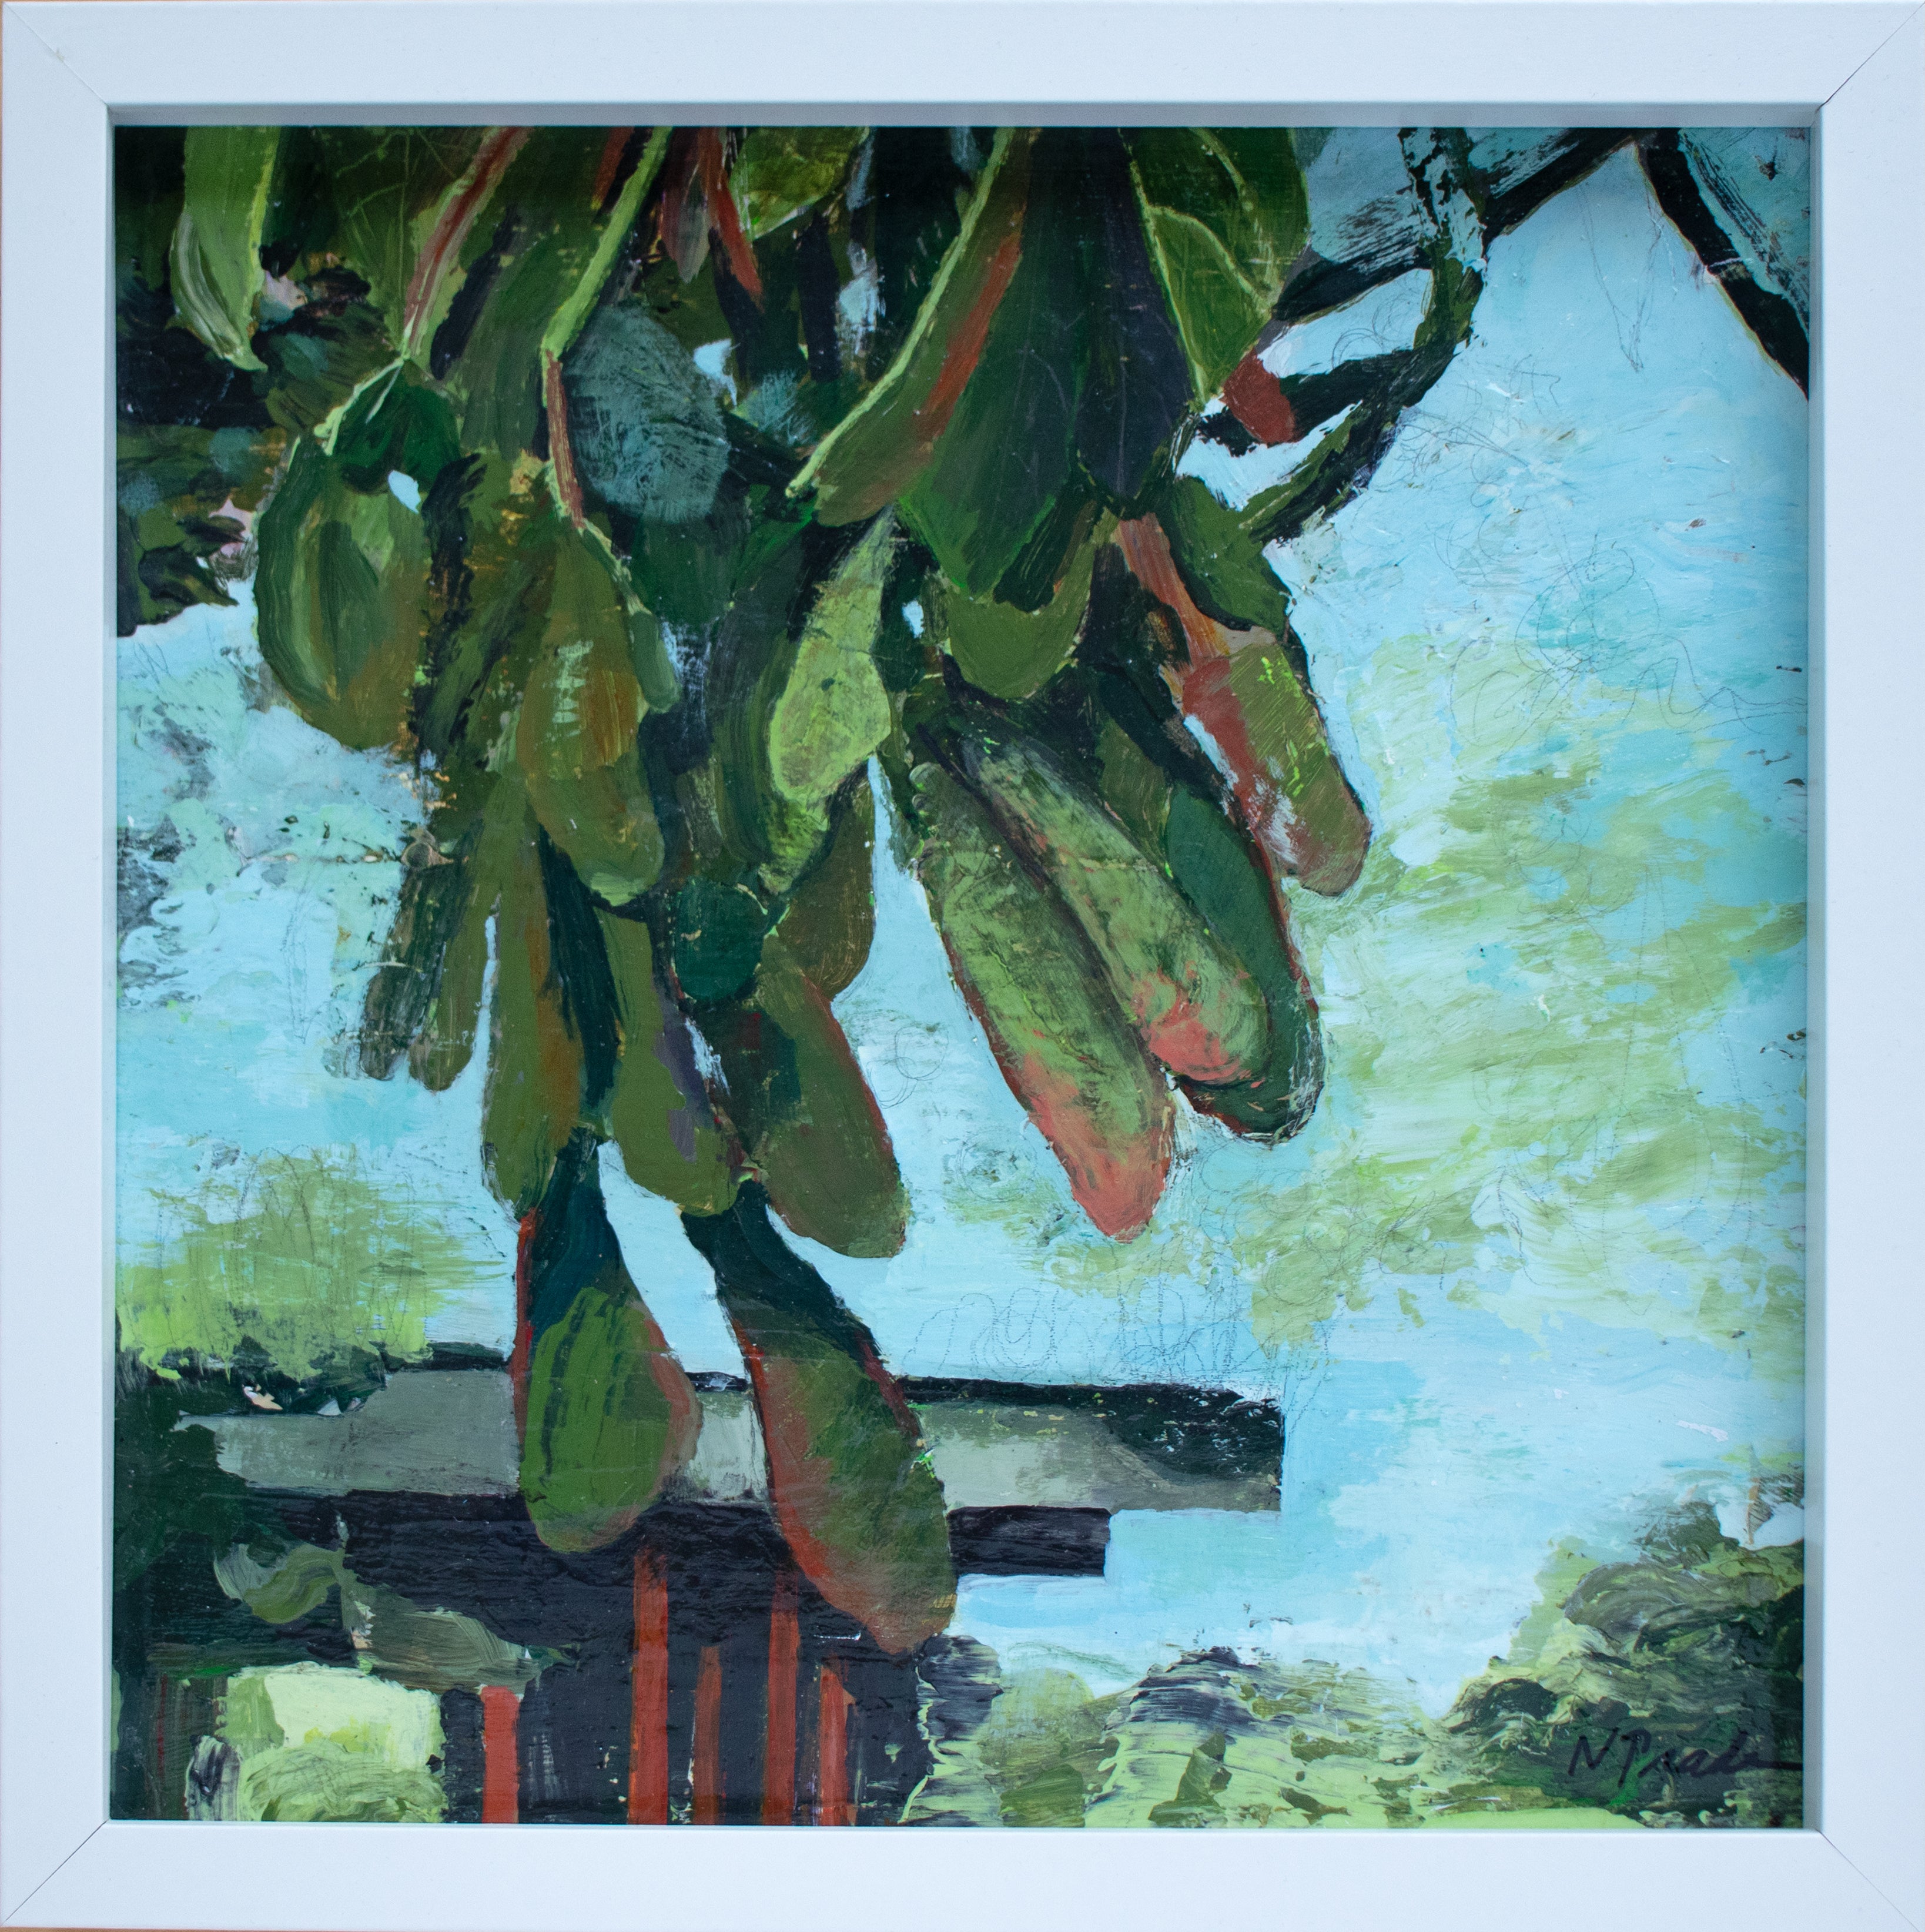 A painting of sycamore leaves dangling from a branch overhead with blue sky in the background. The marks and textures are lively and give a feeling of breeze on a spring day.